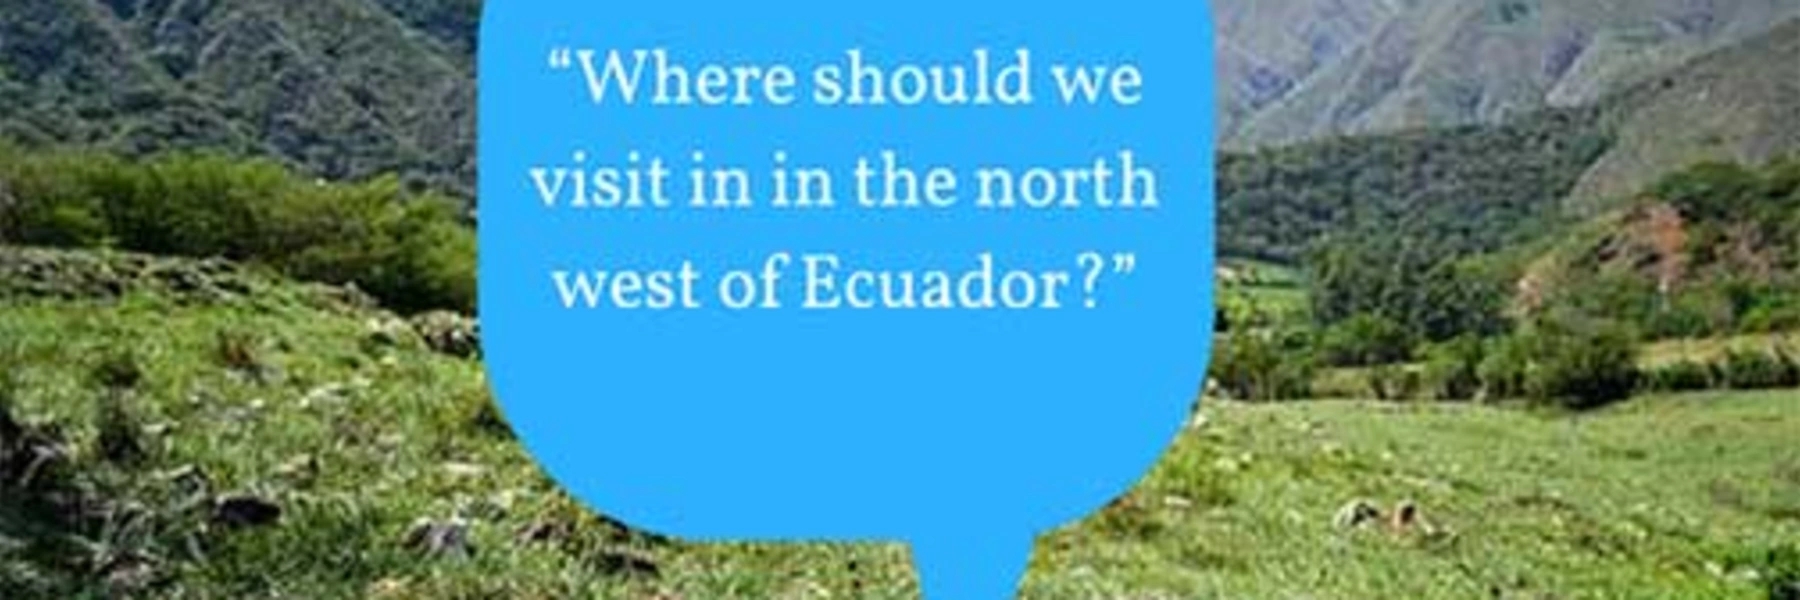 “Where should we visit in in the north west of Ecuador?”